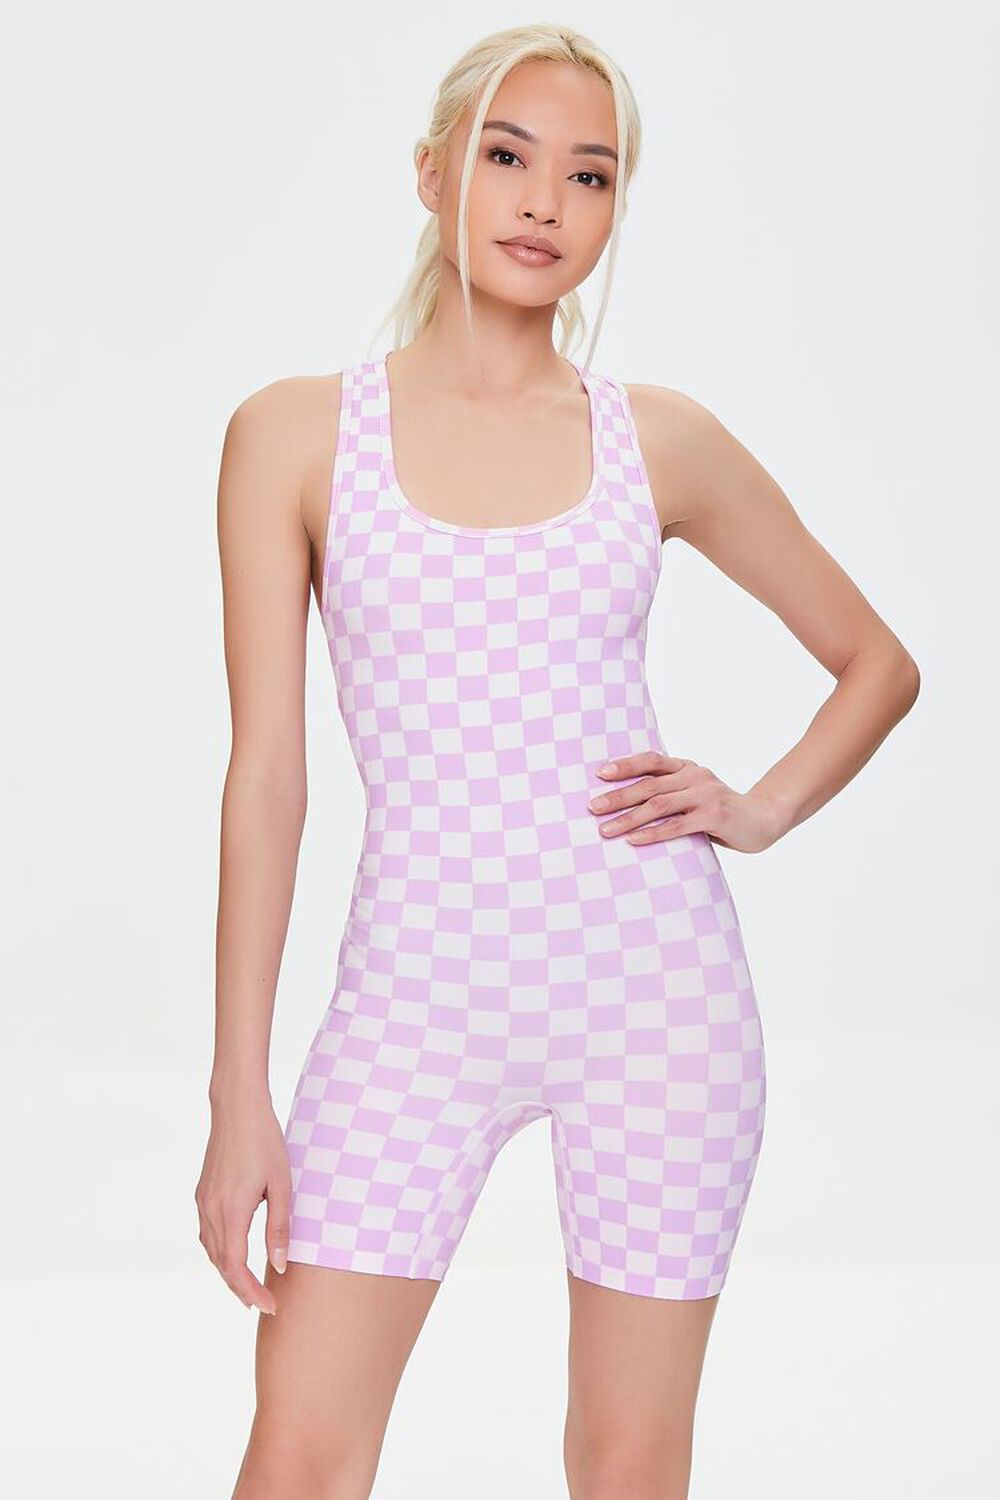 PINK/LIGHT PINK Active Seamless Checkered Print Cutout Romper, image 1